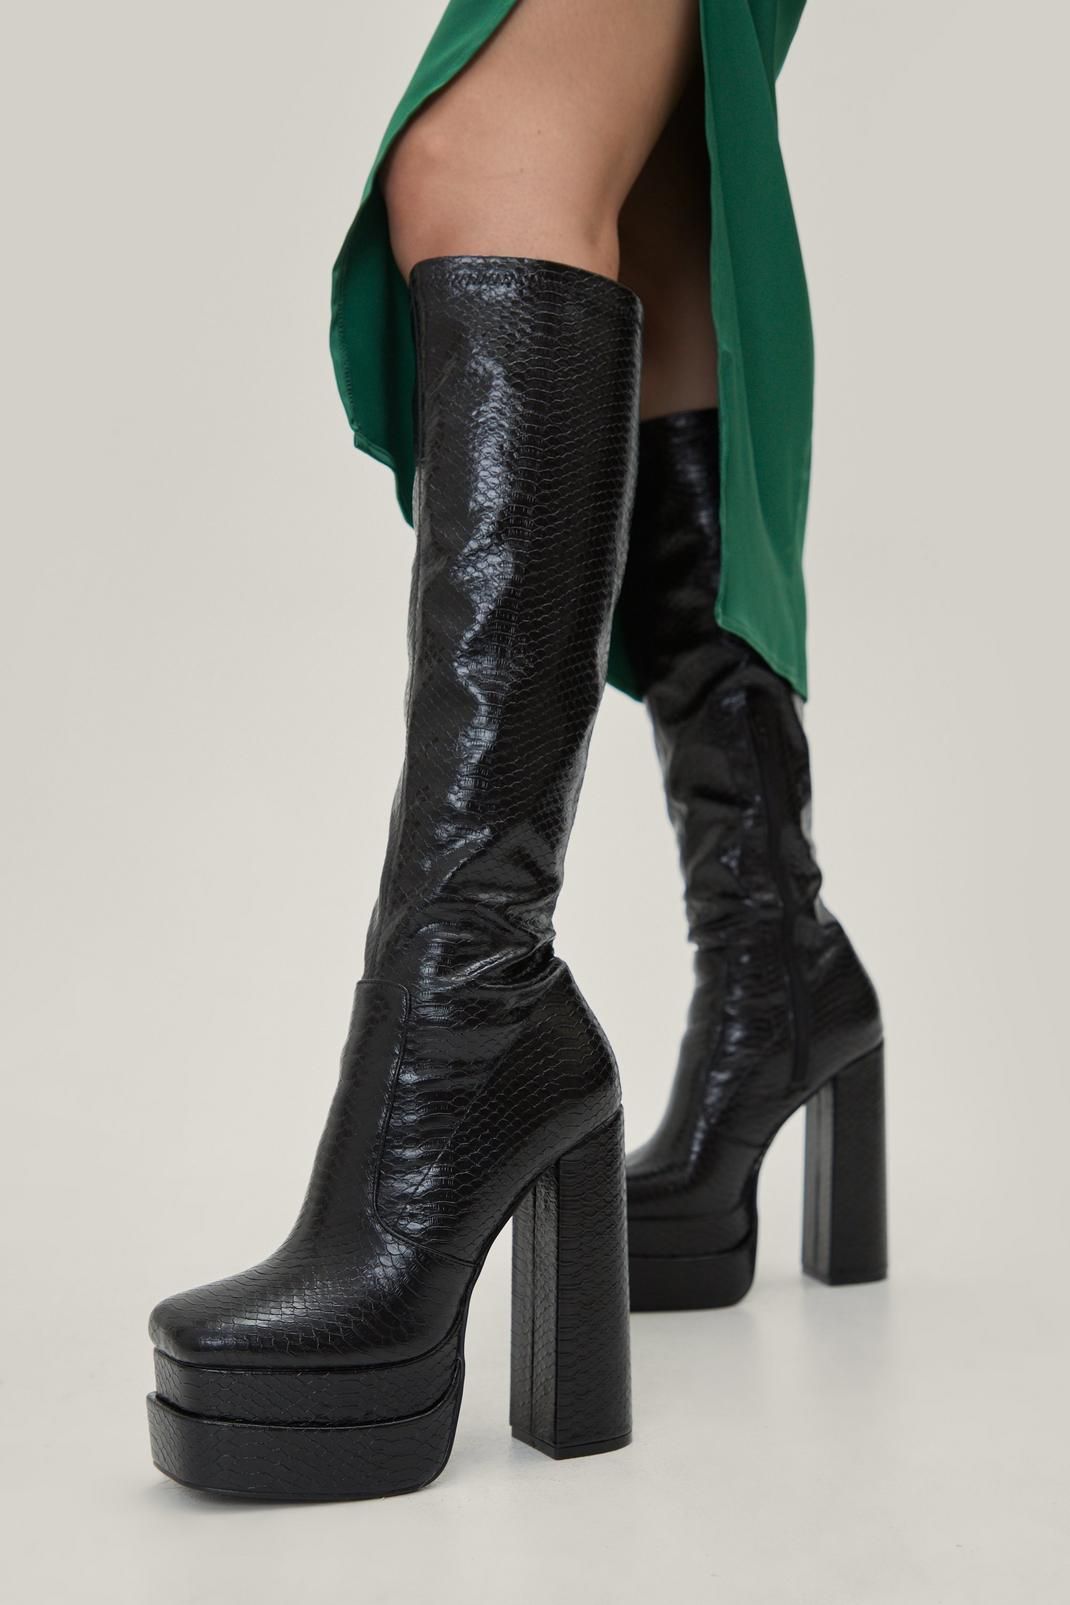 Embossed Lizard Faux Leather Platform Knee High Boots